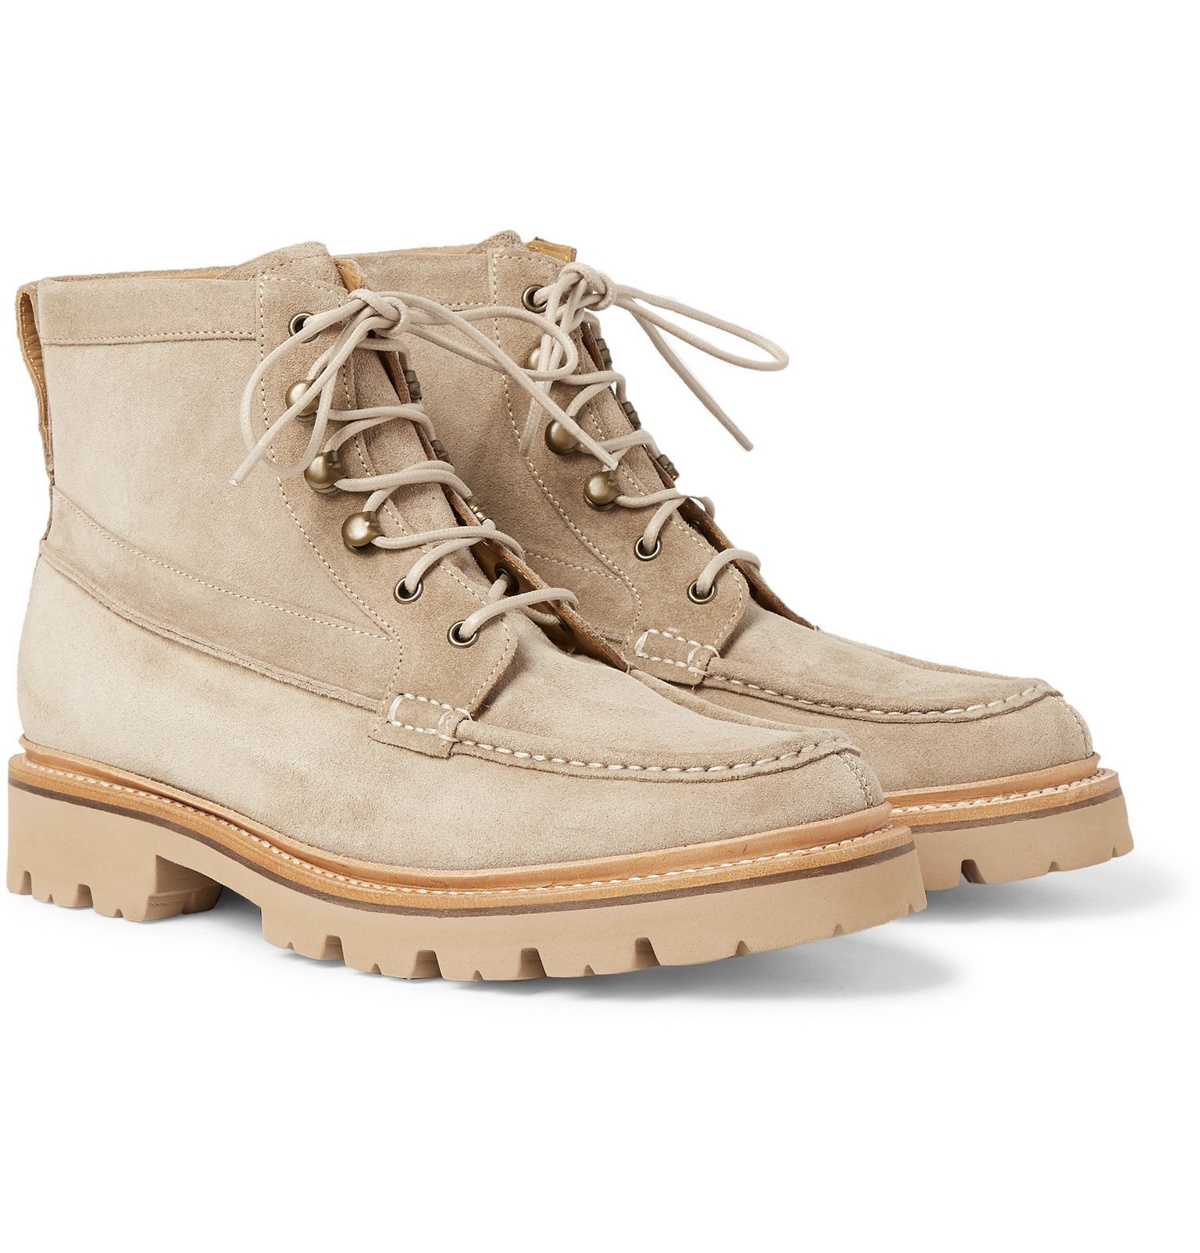 Grenson - Rocco Suede Boots - Brown Grenson